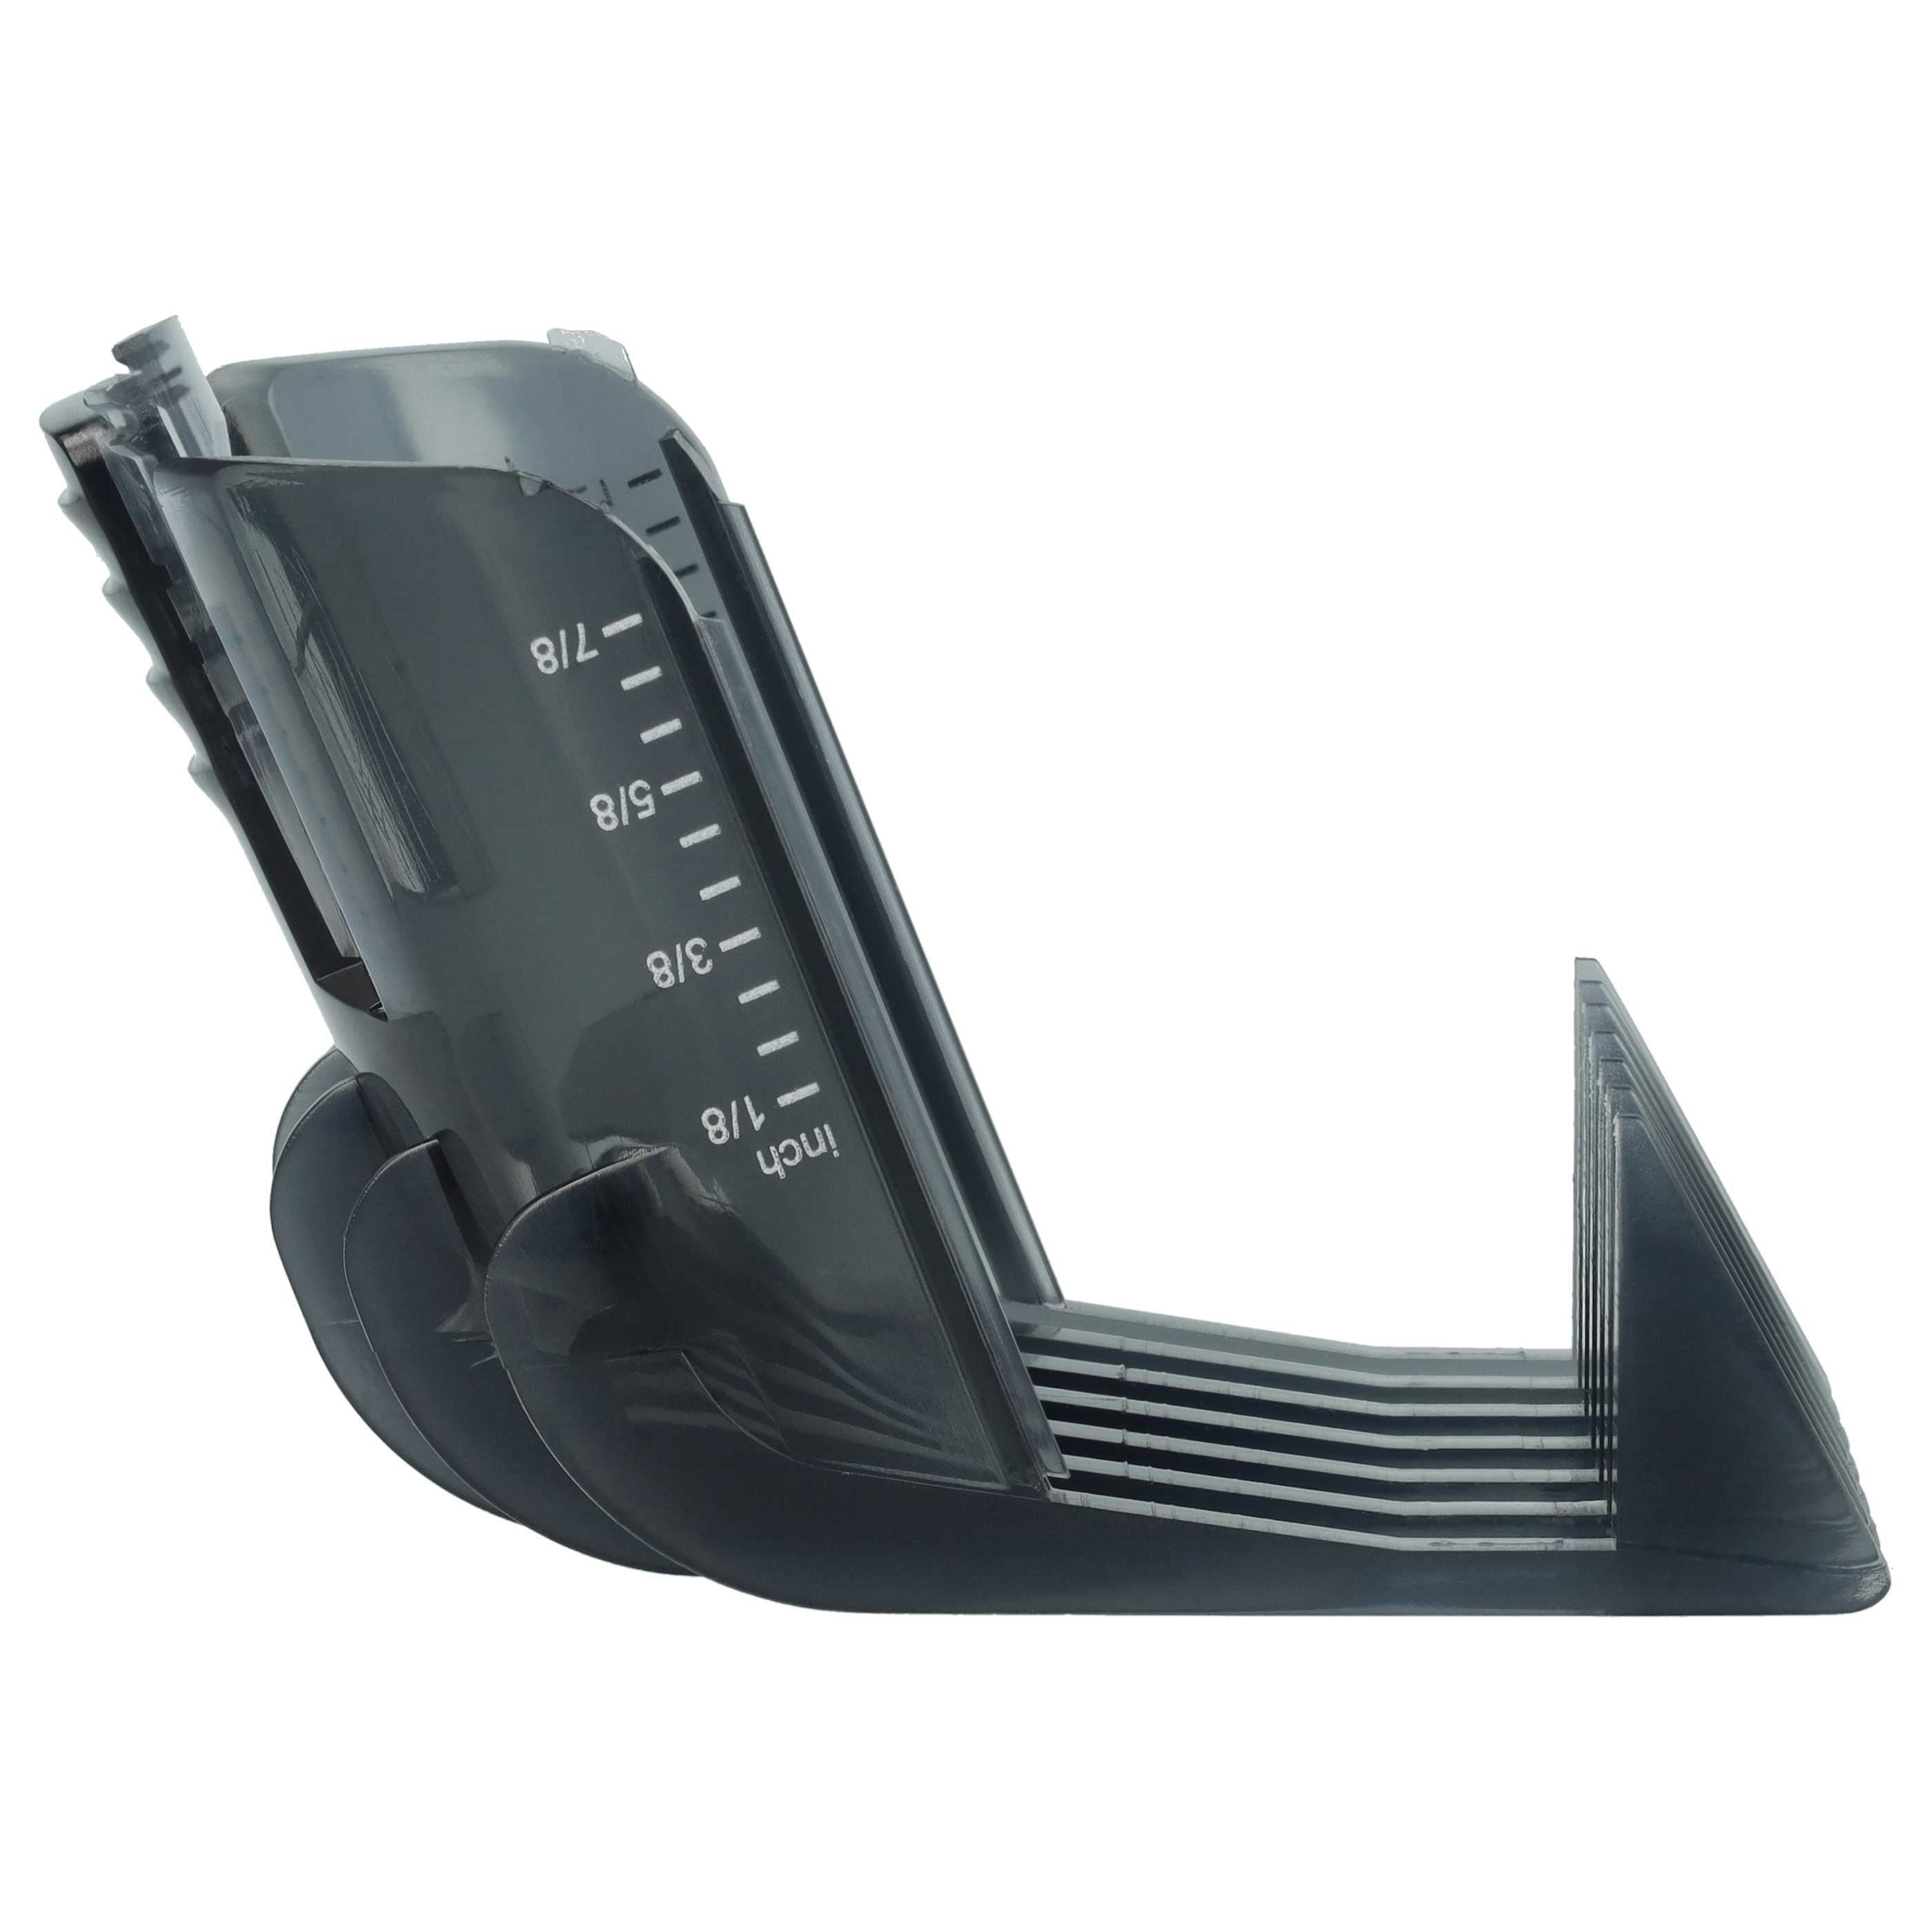 3 - 21 mm (1/8" - 7/8") Comb Attachment replaces Philips CRP389 for Philips Hair Clippers 